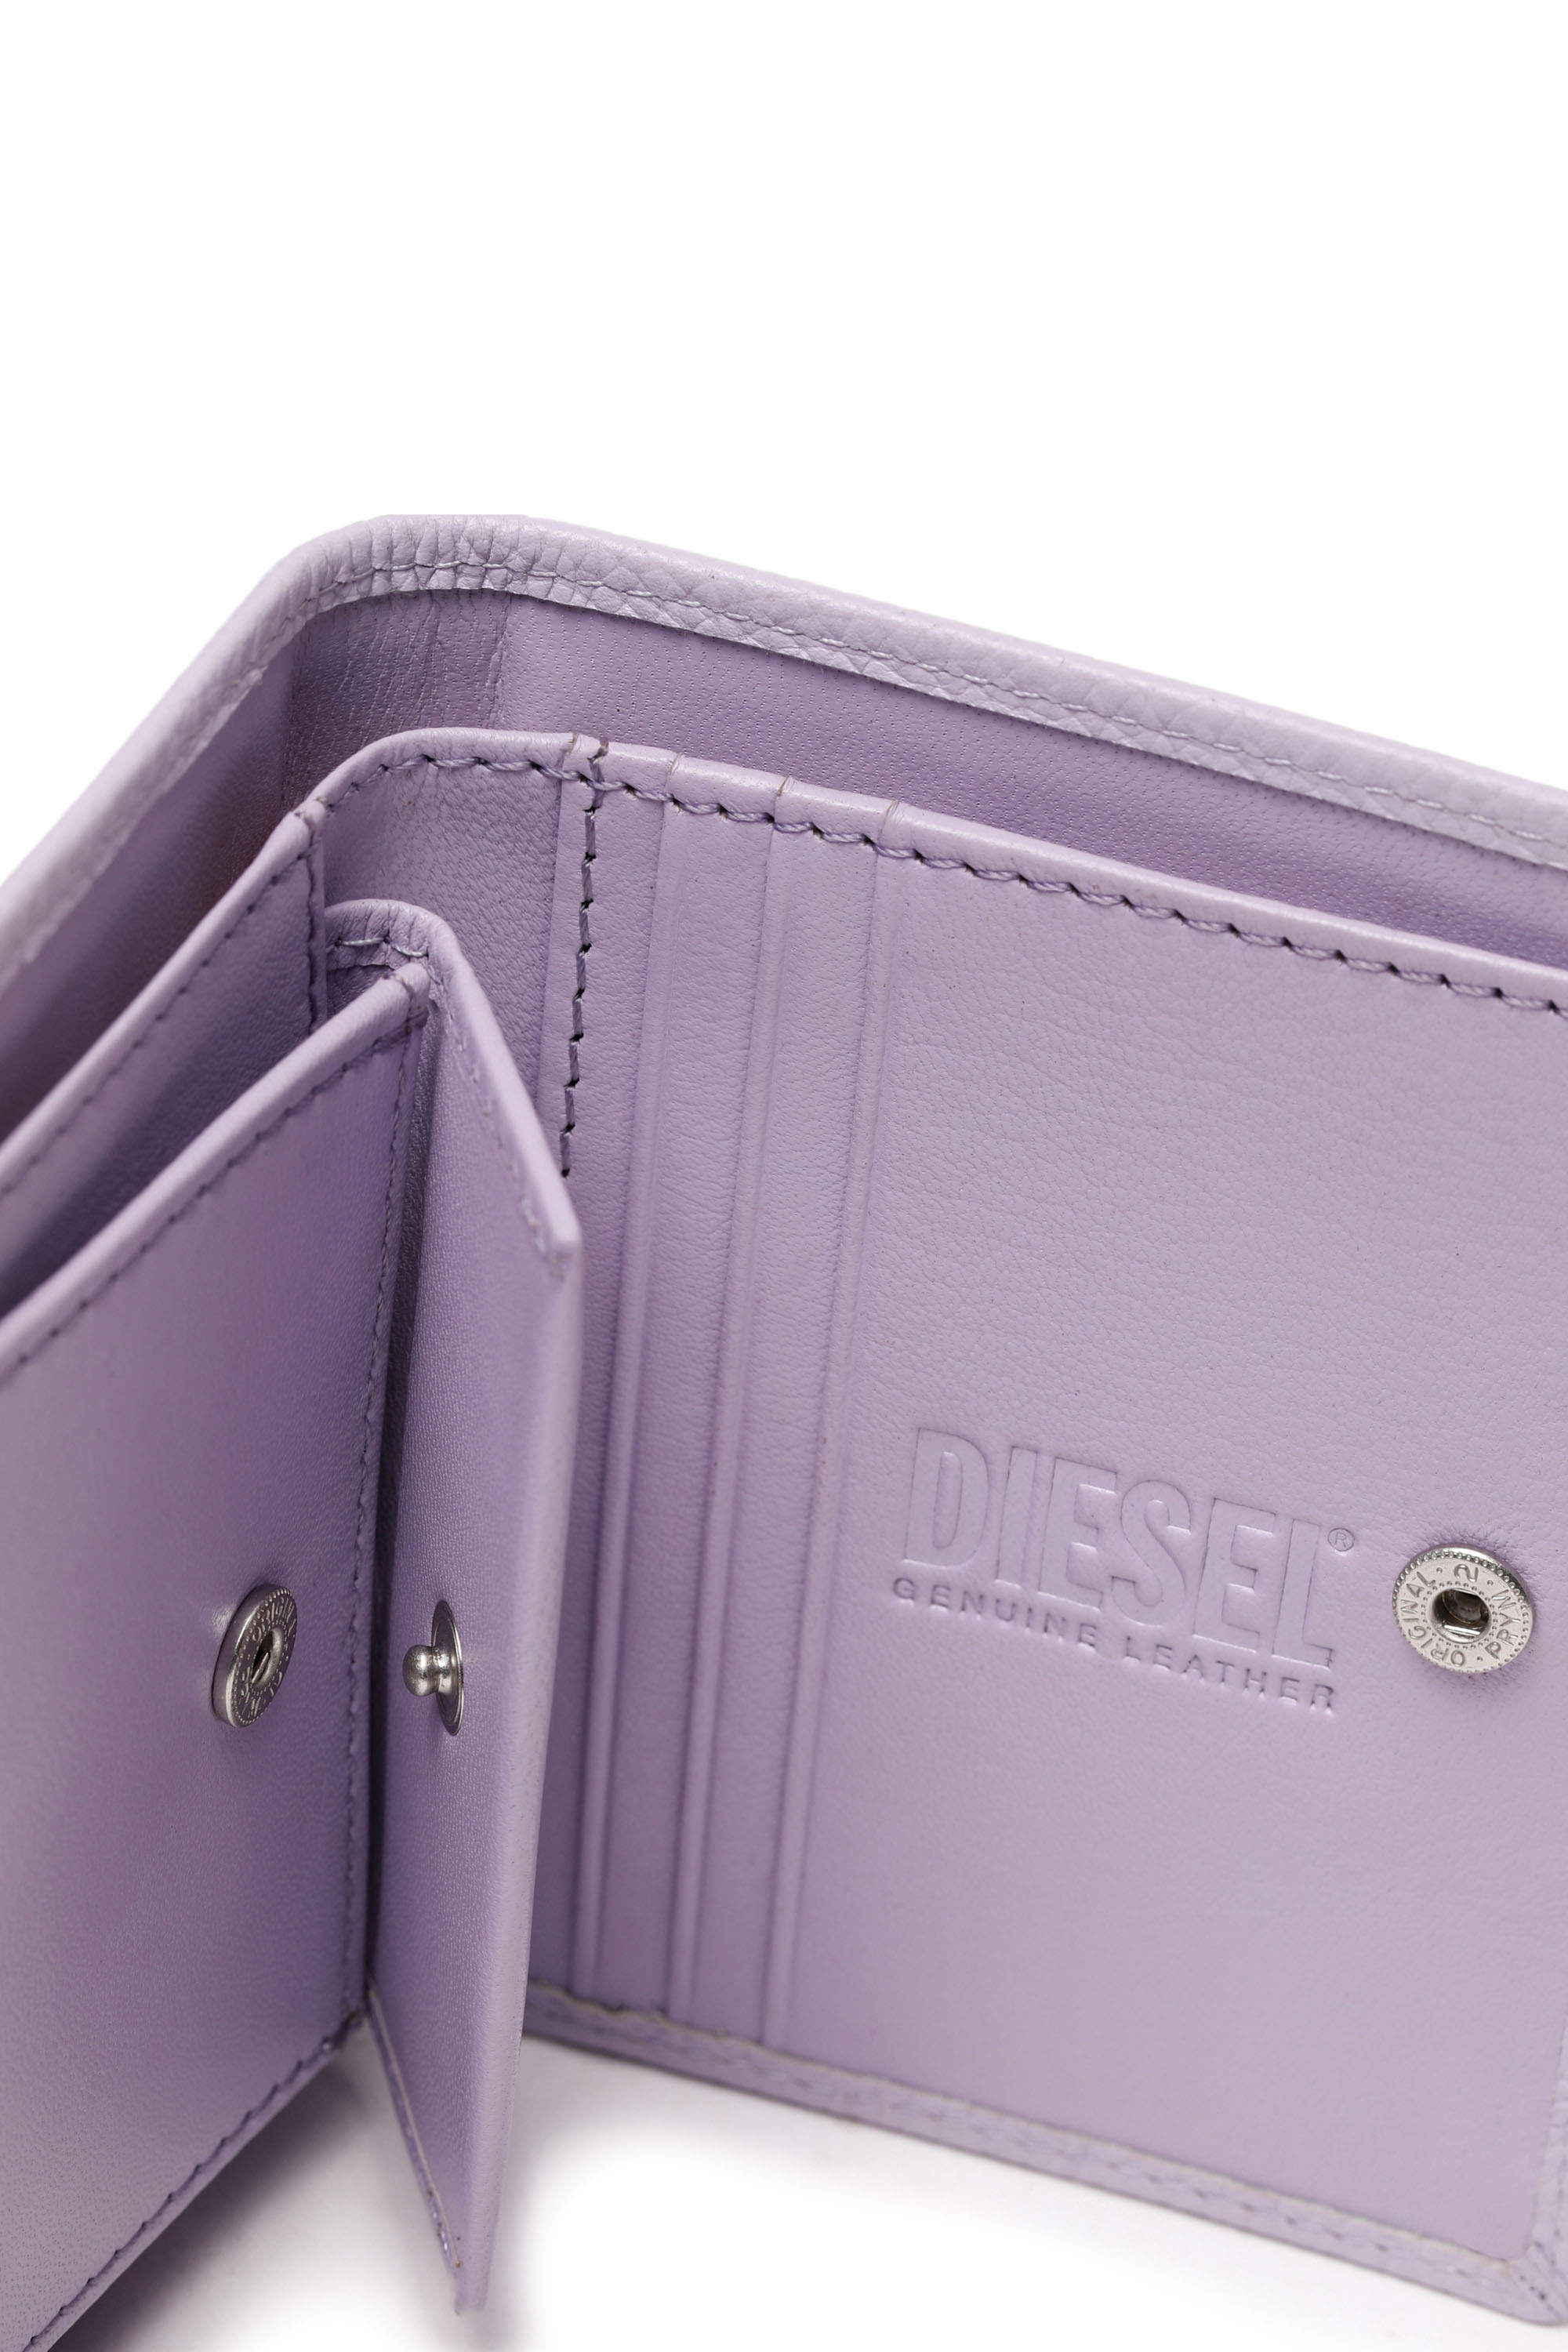 Diesel - CAMILLE, Lilac - Image 4